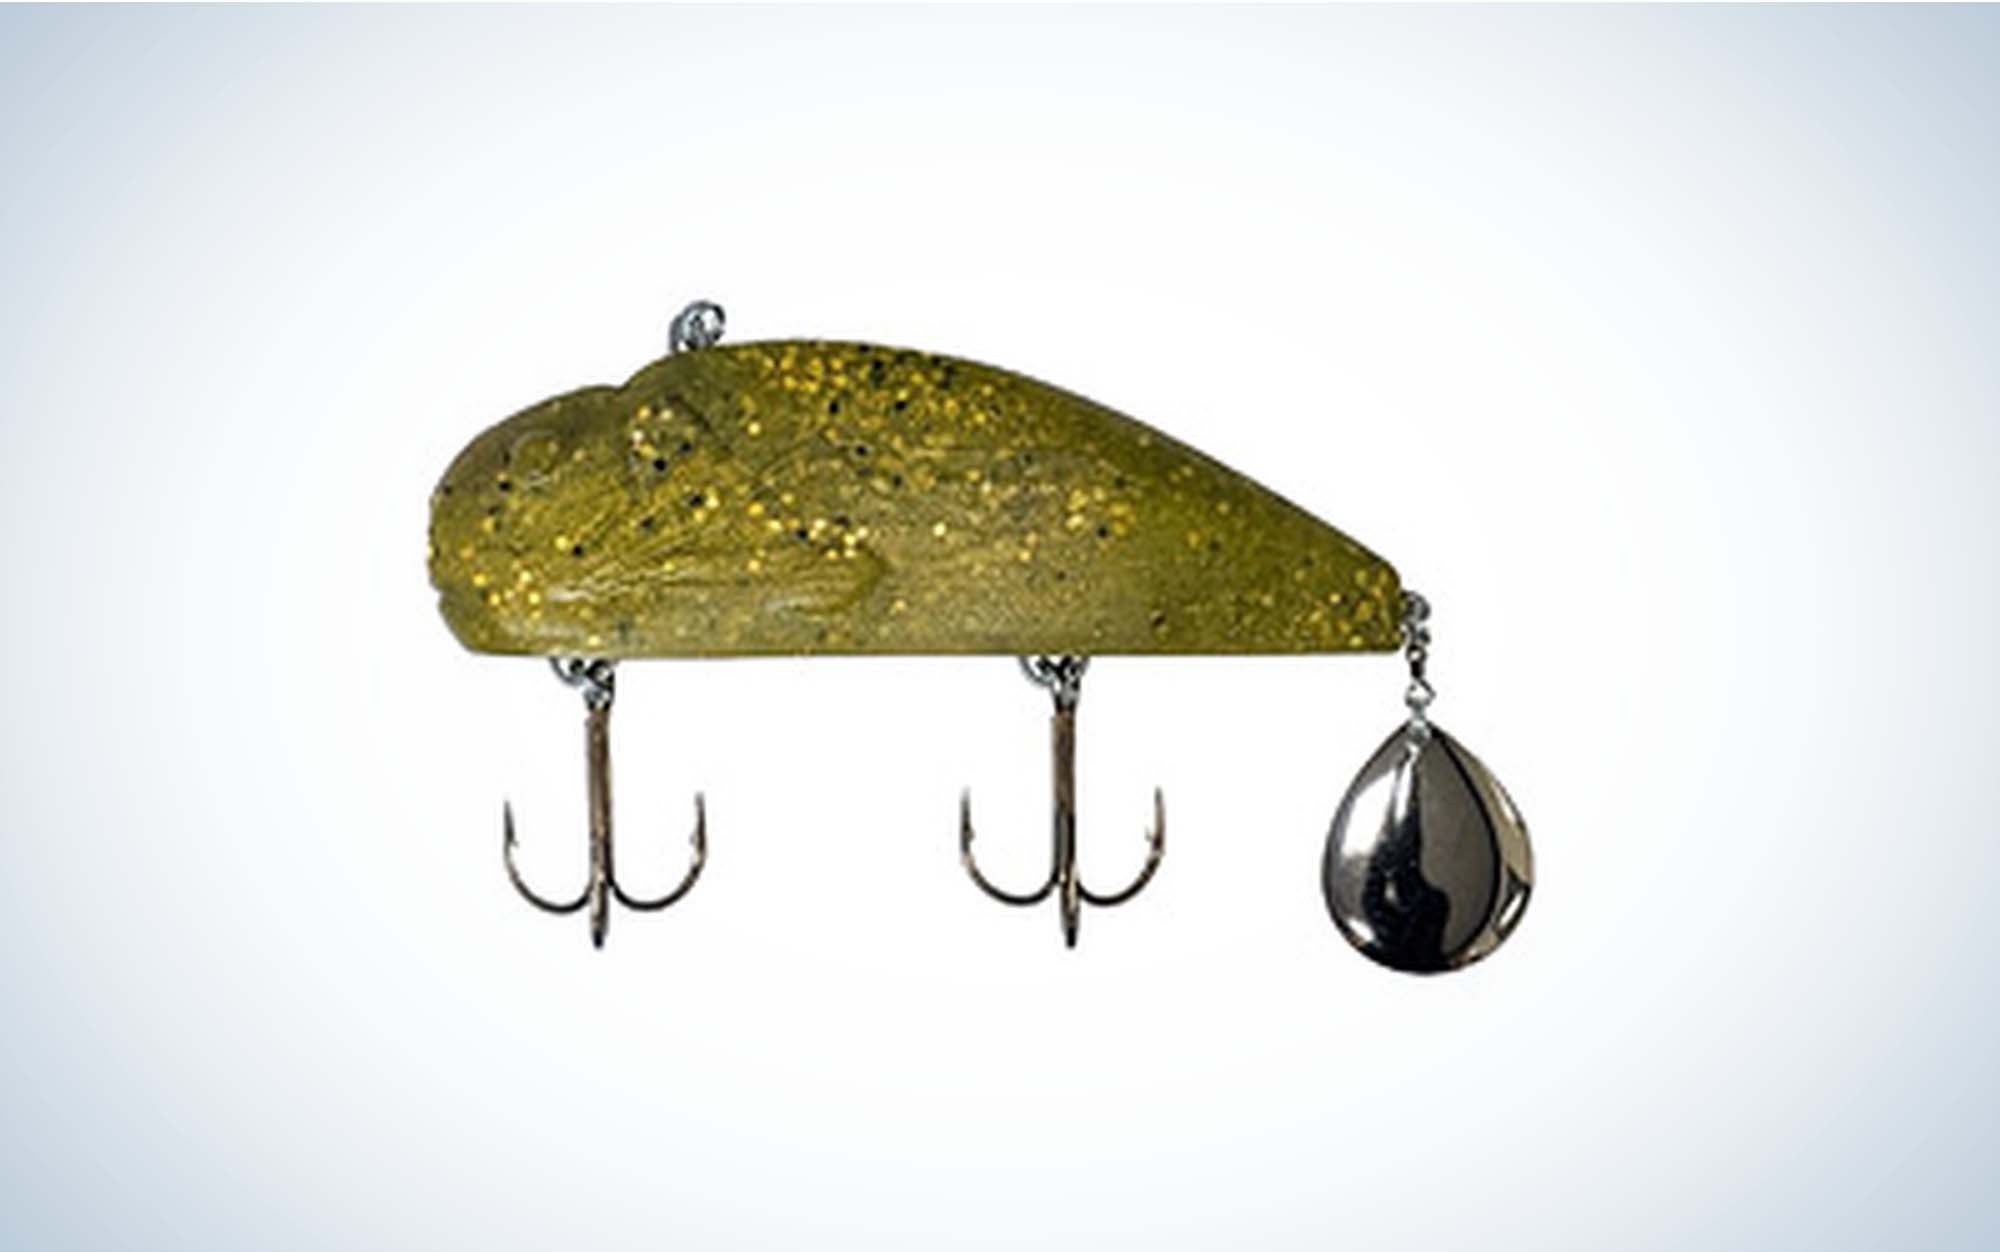 The Bondy Bait Junior is one of the most versatile lake trout lures.